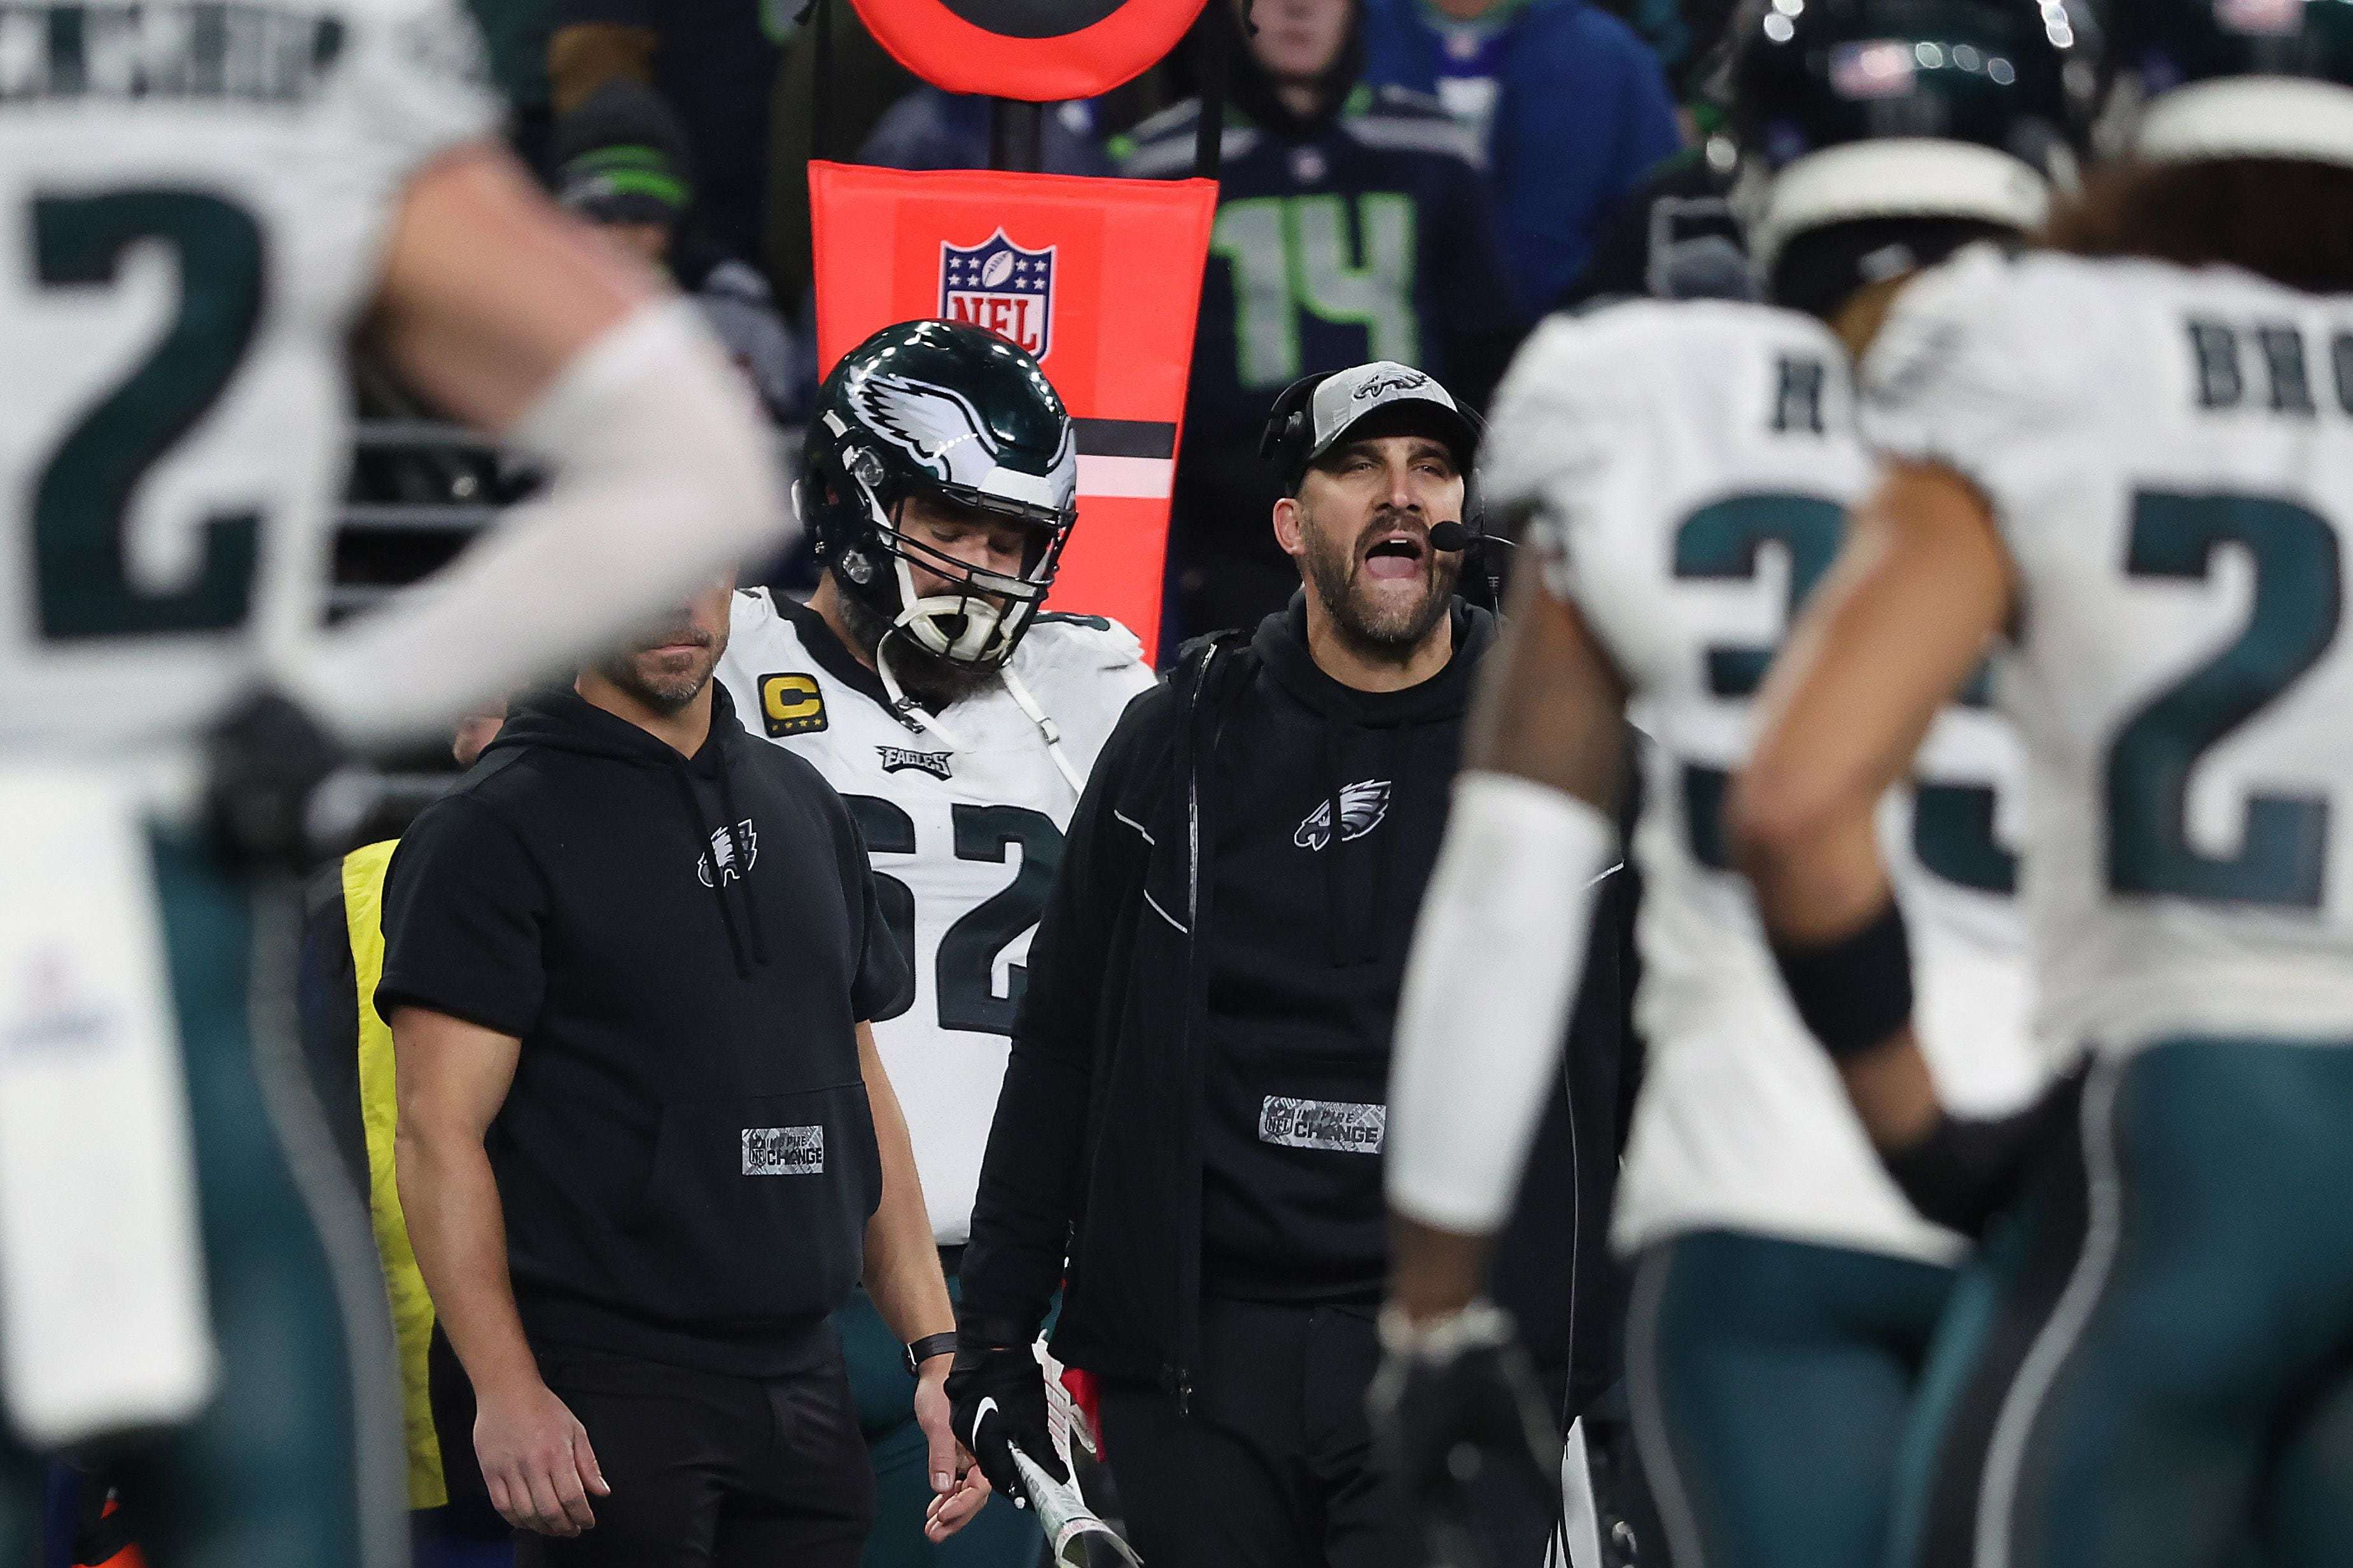 if nick sirianni wants to save his career as the eagles’ coach, he needs to learn to calm down